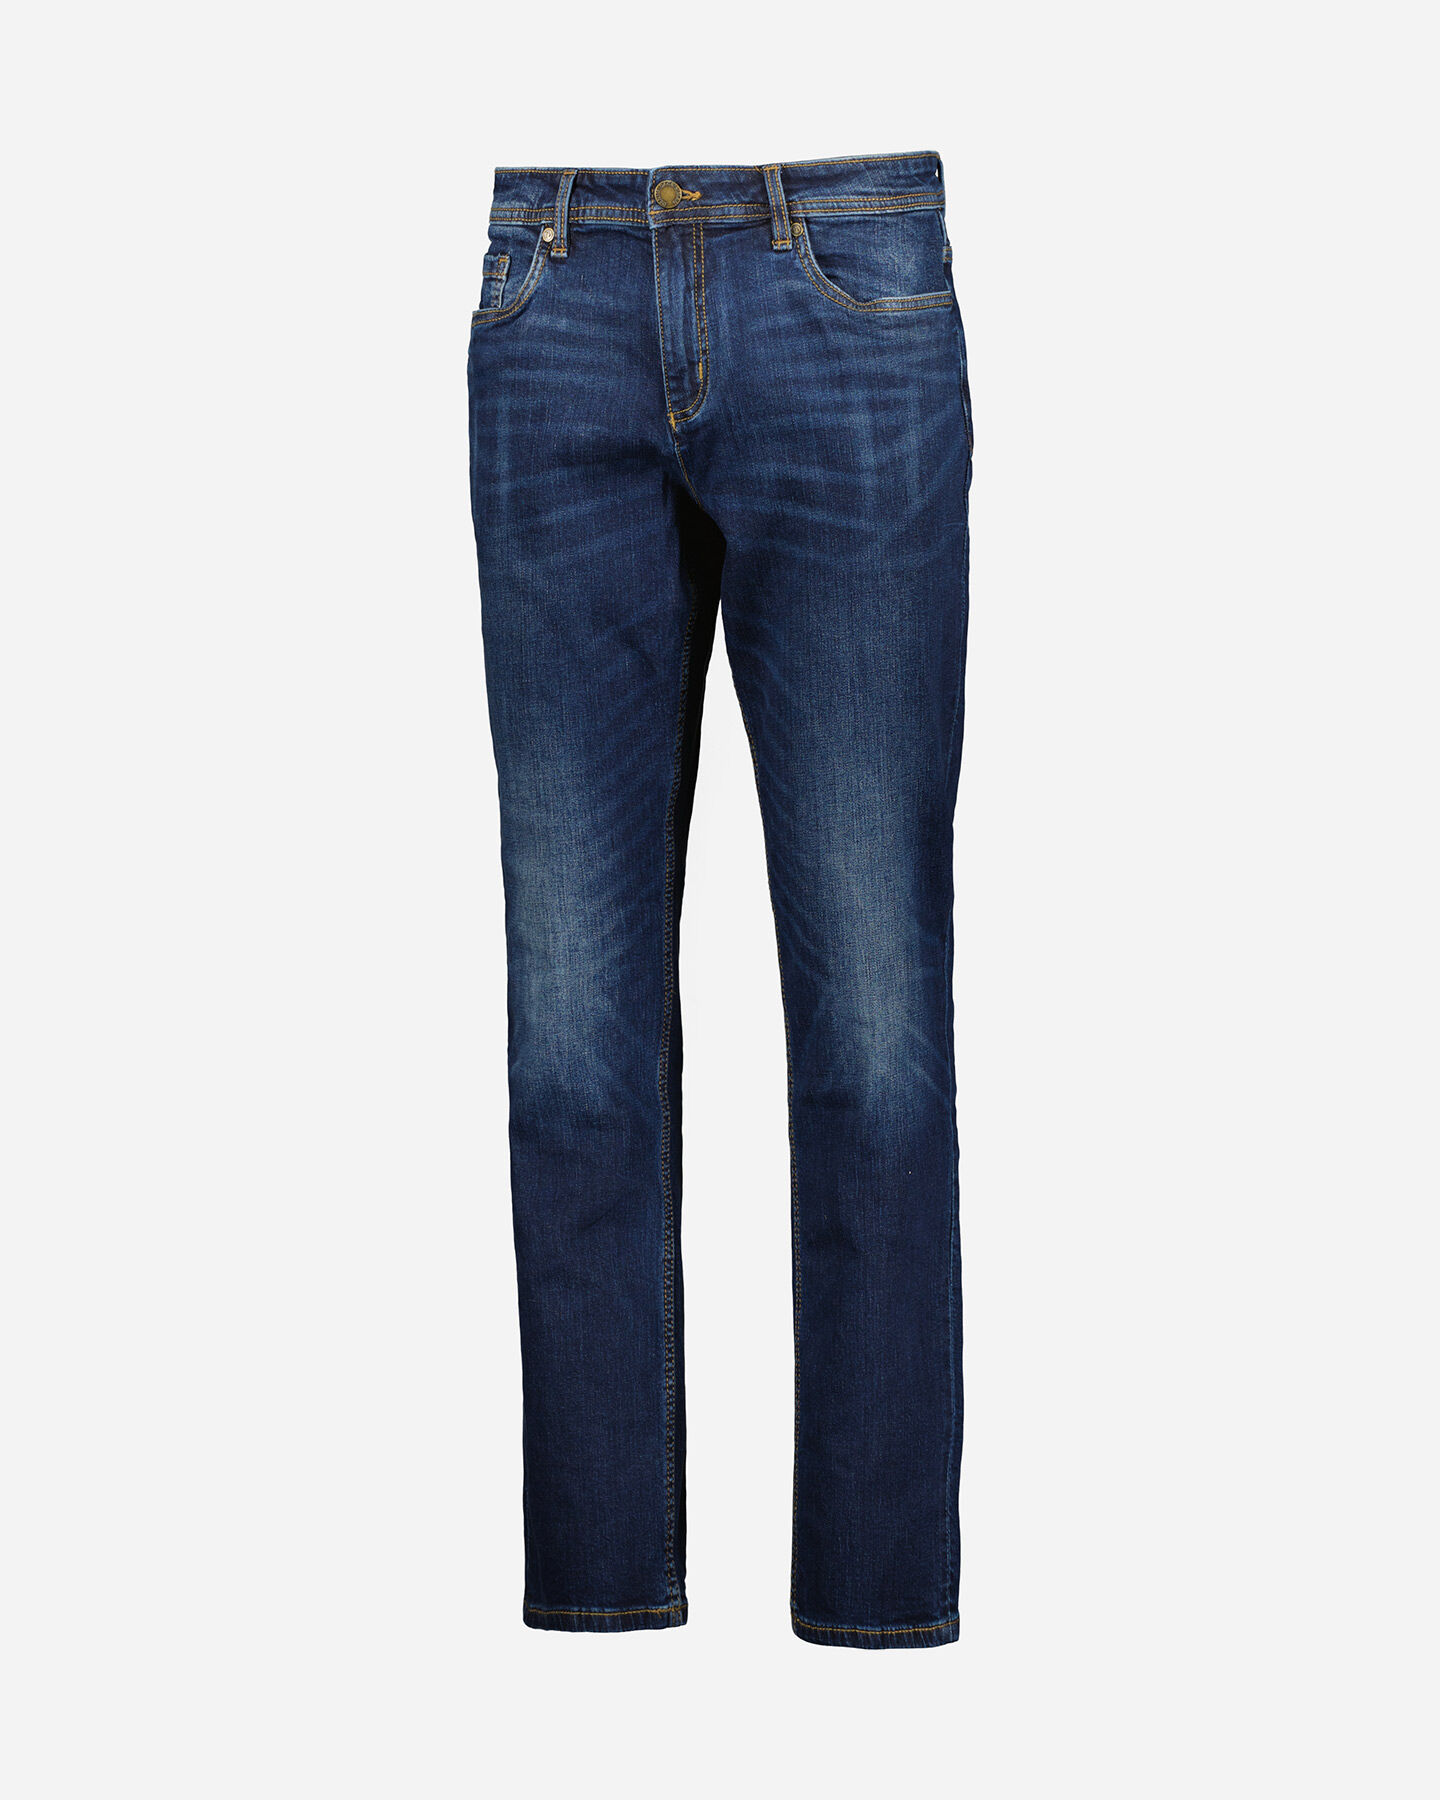  Jeans DACK'S CASUAL CITY M S4106781|MD|52 scatto 4